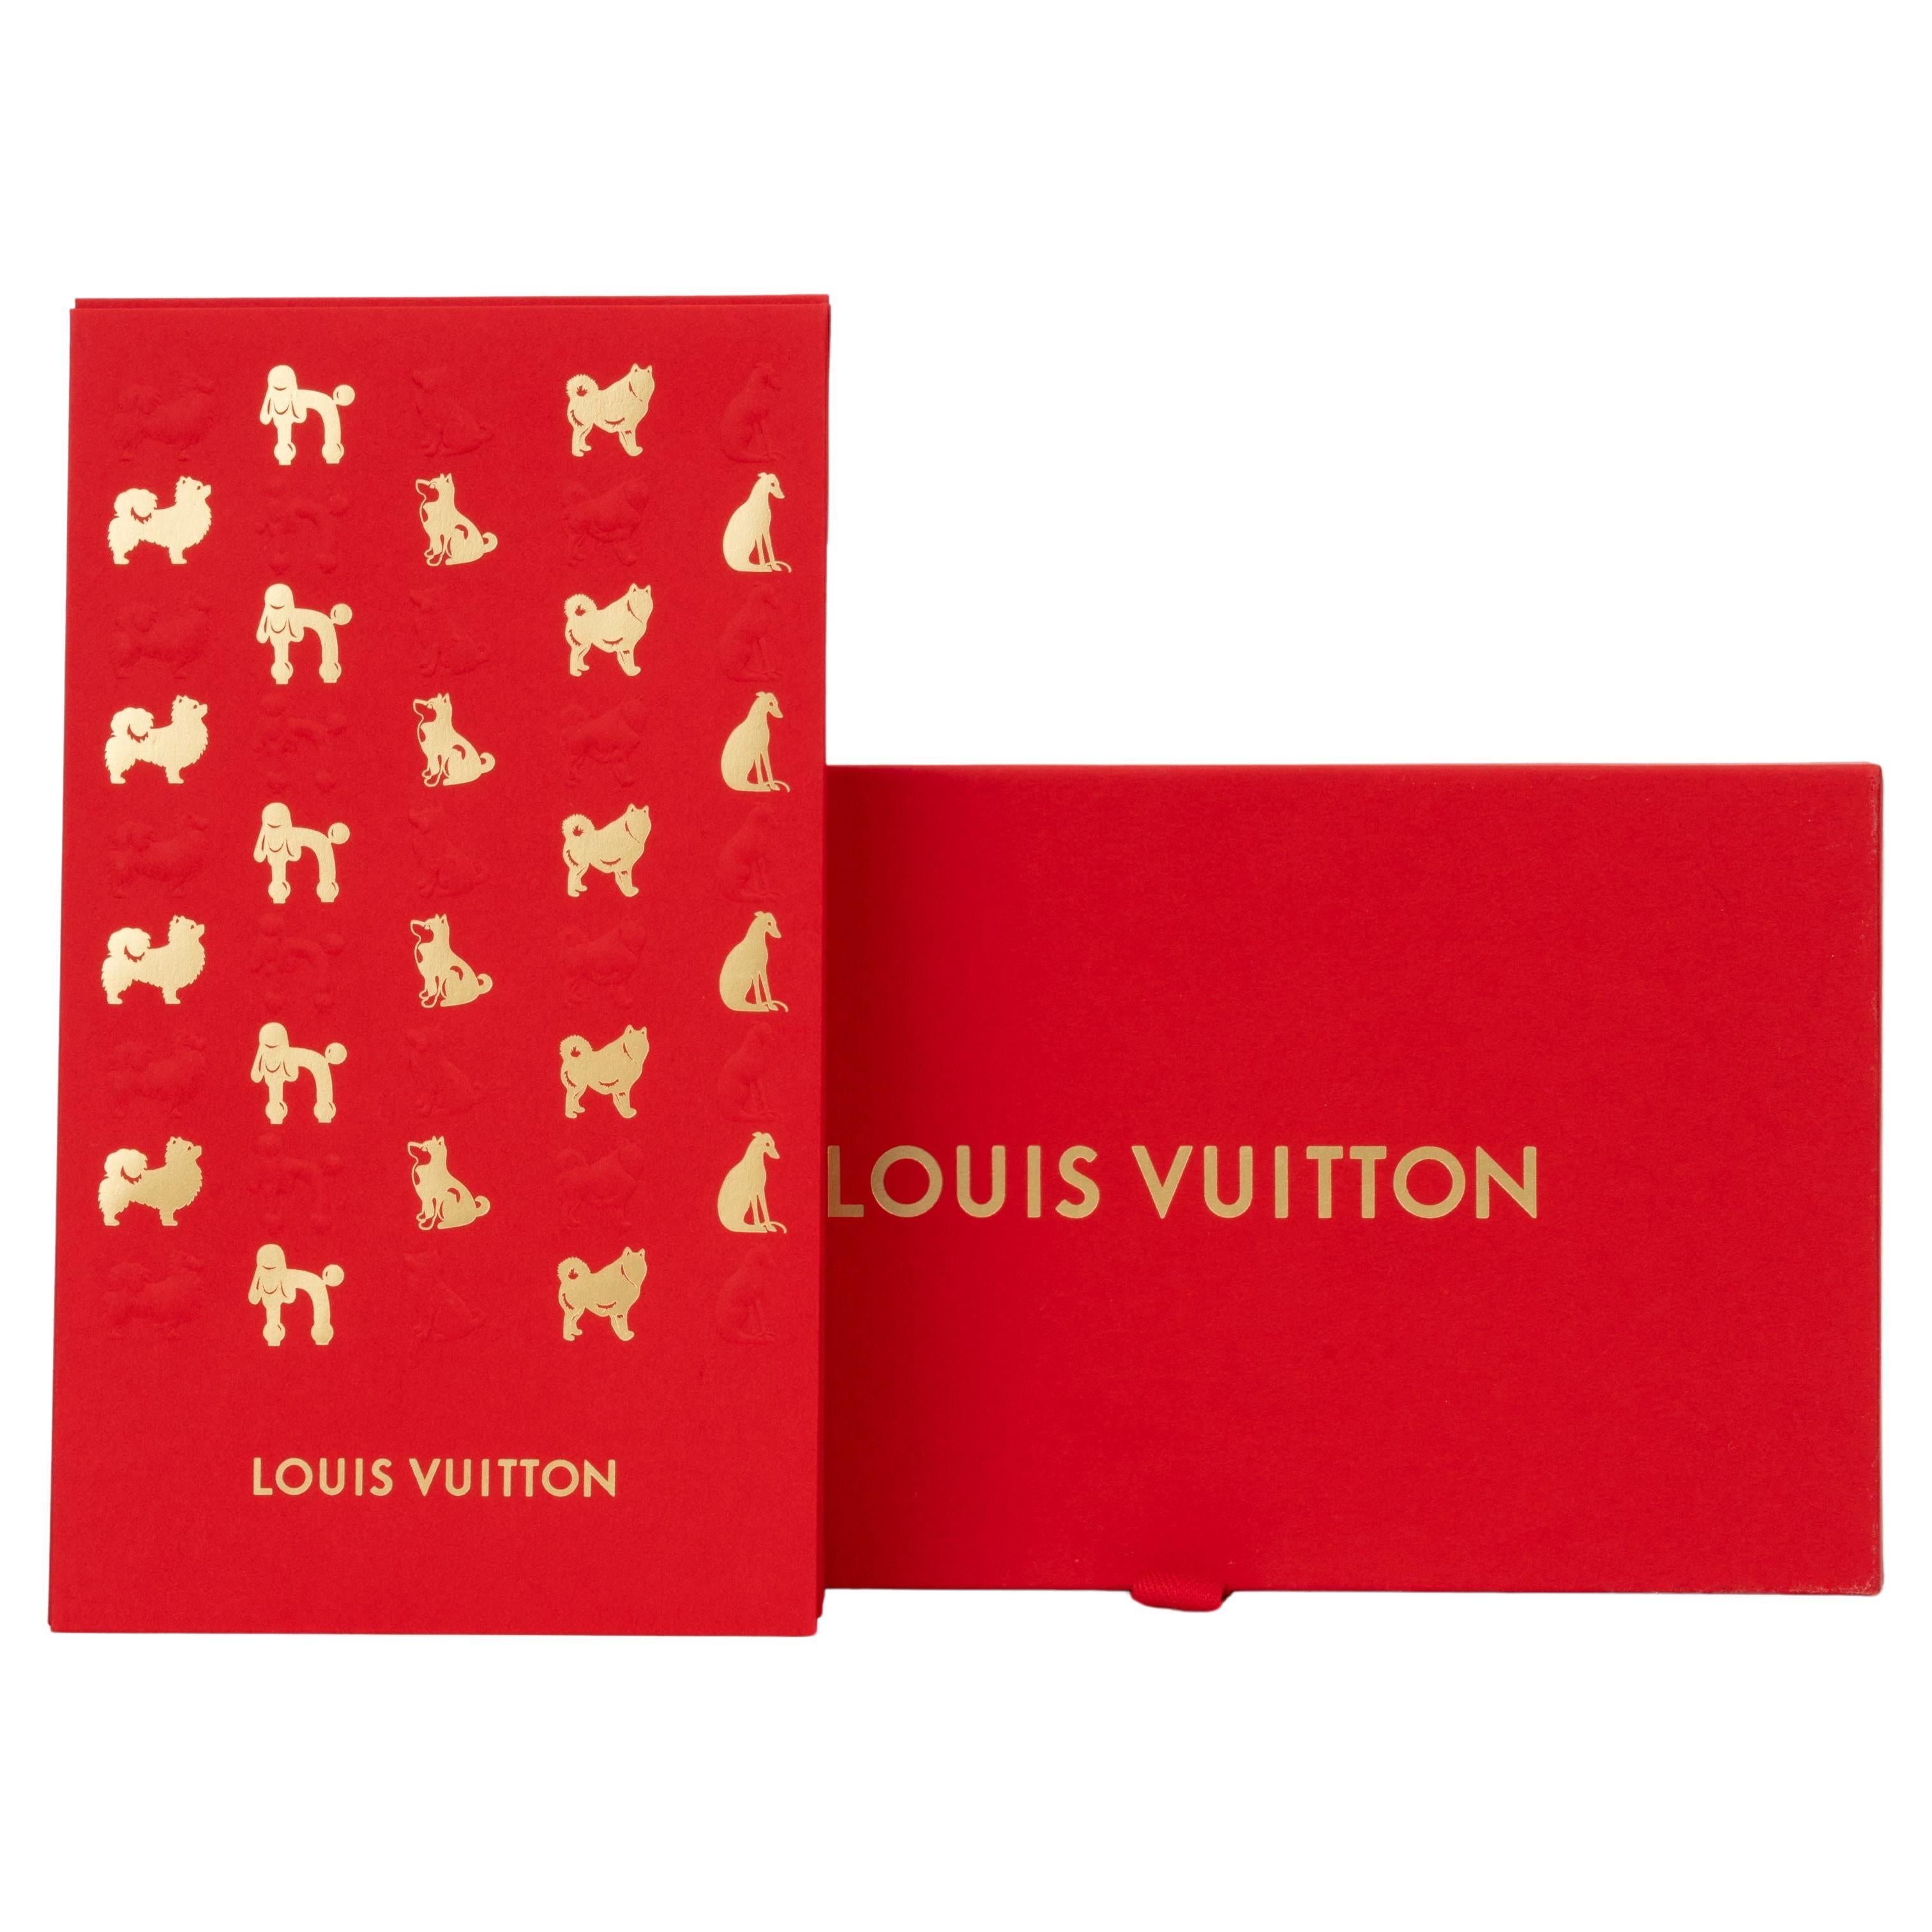 Vuitton Year of the Dog Red Envelopes For Sale